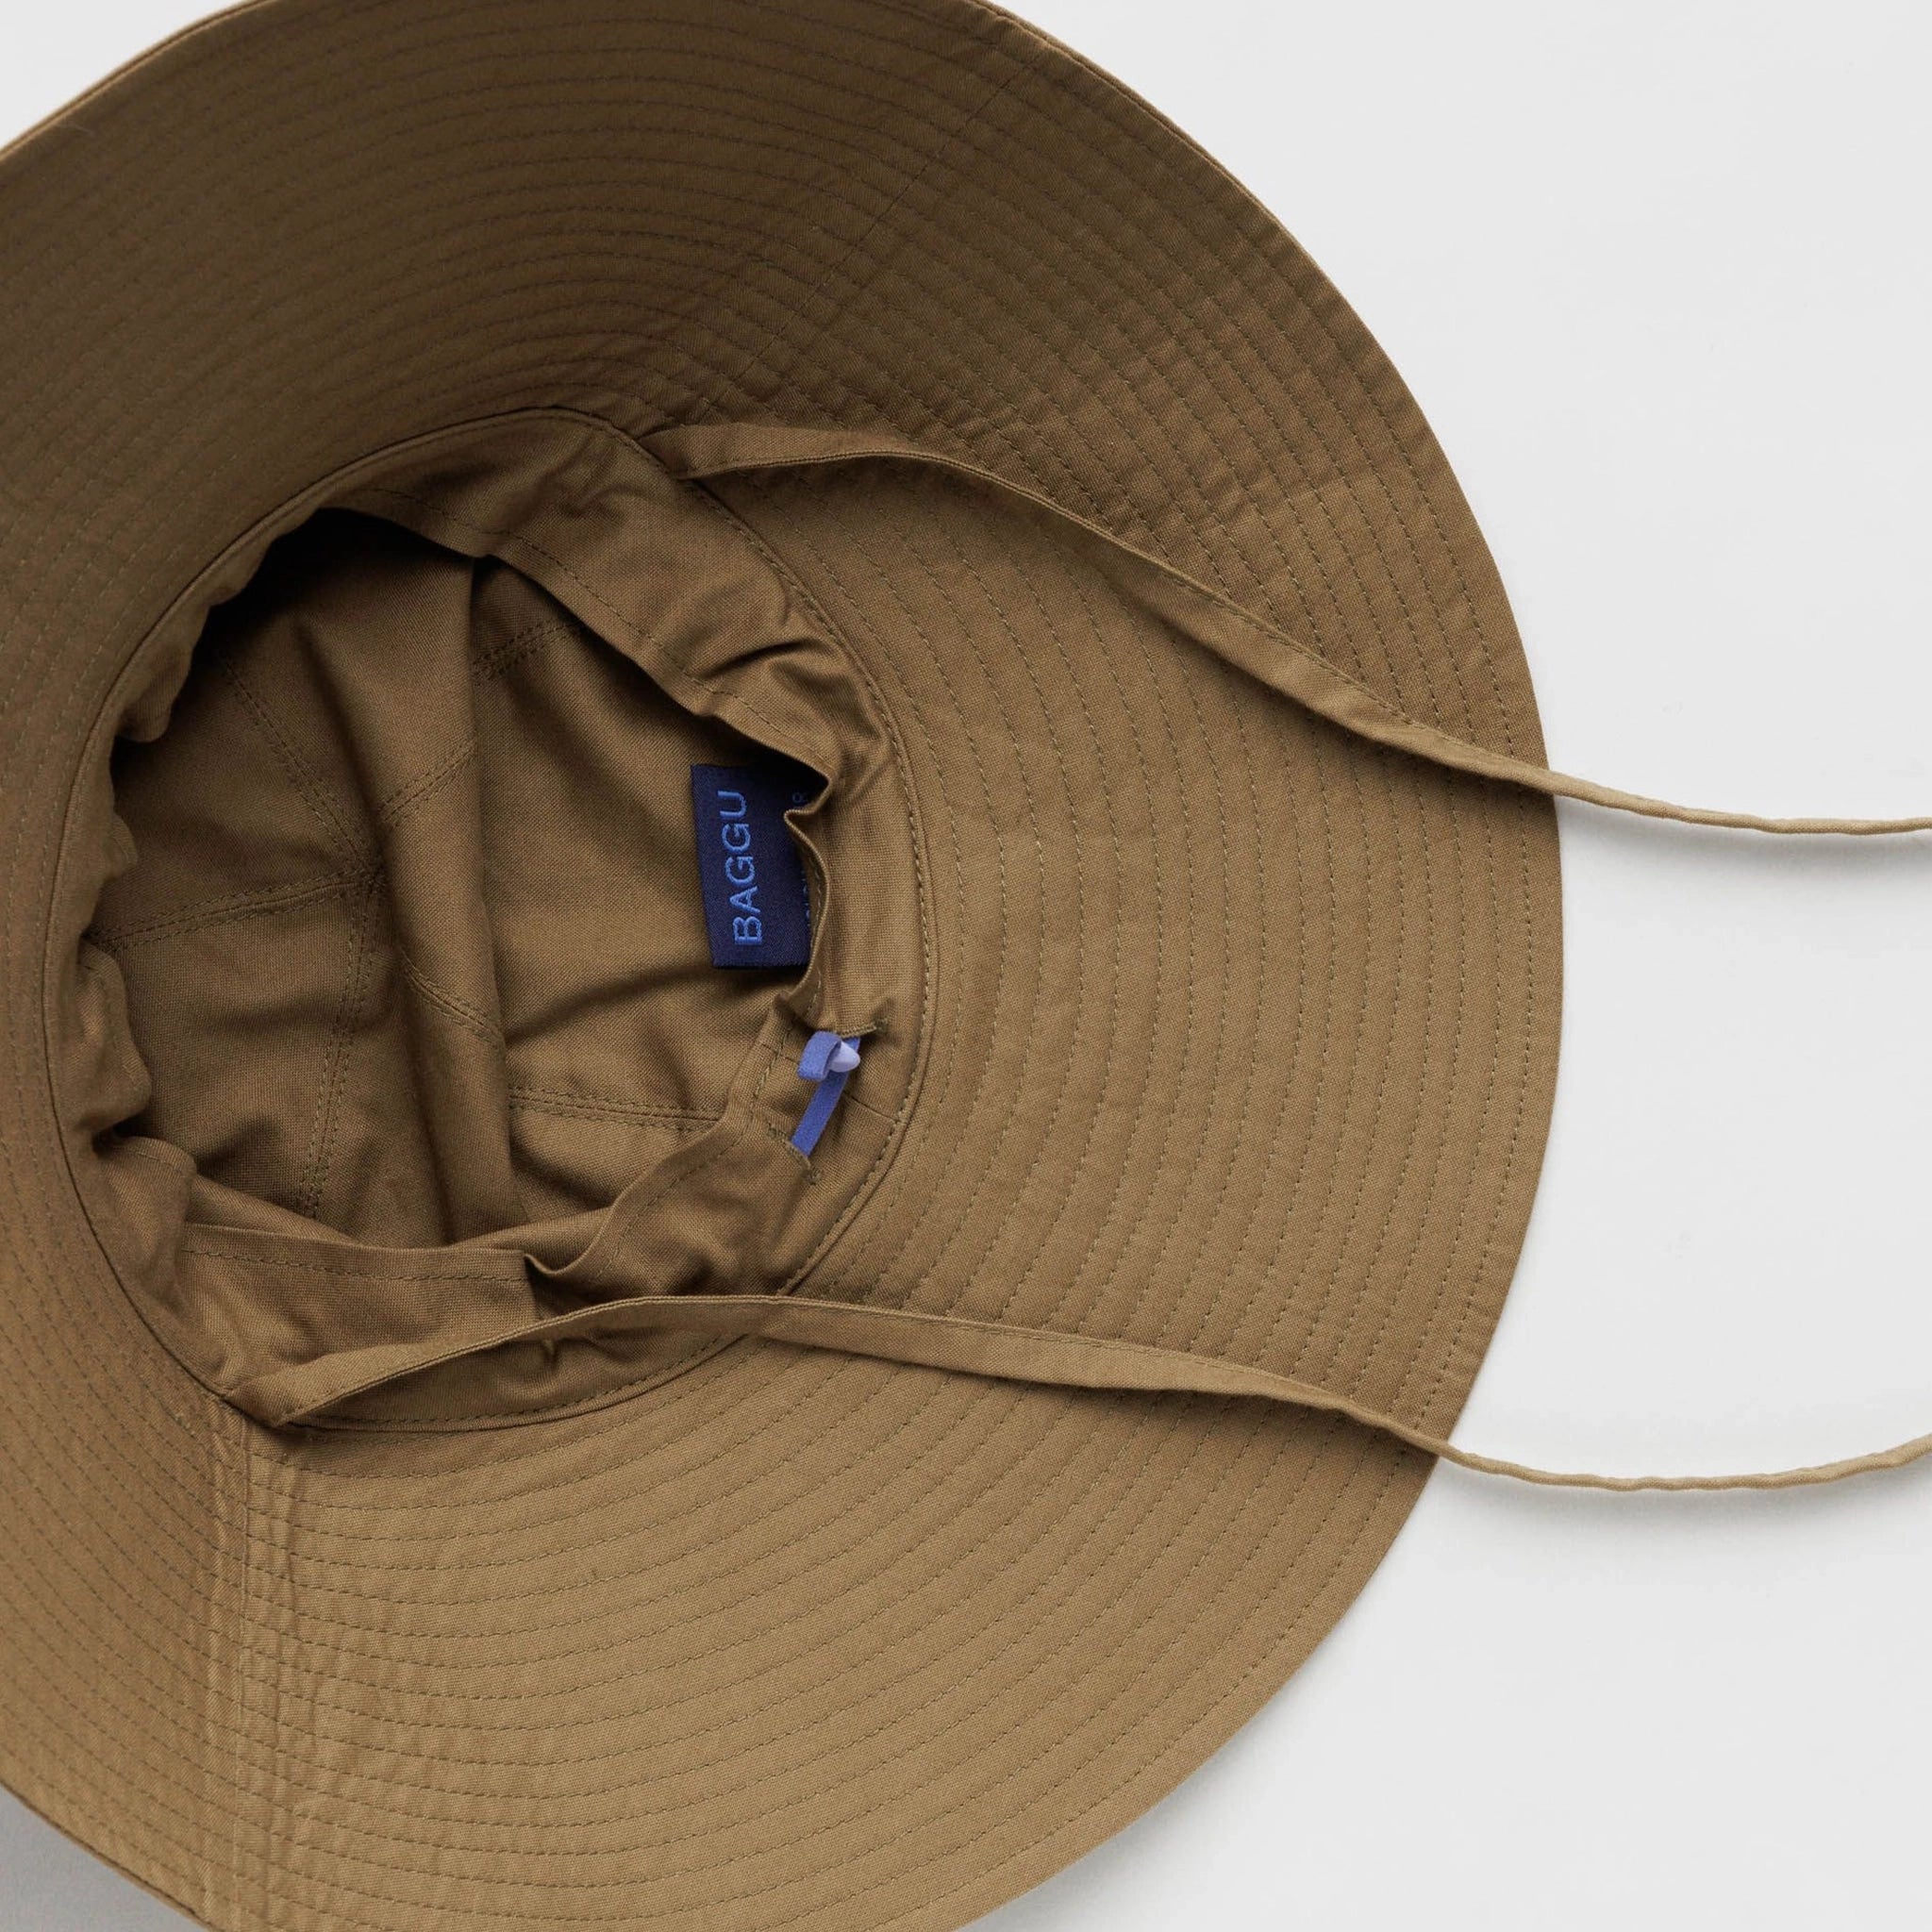 On a white background is a flexible sun hat in a brown shad with a wide brim and two straps for securing around the neck.